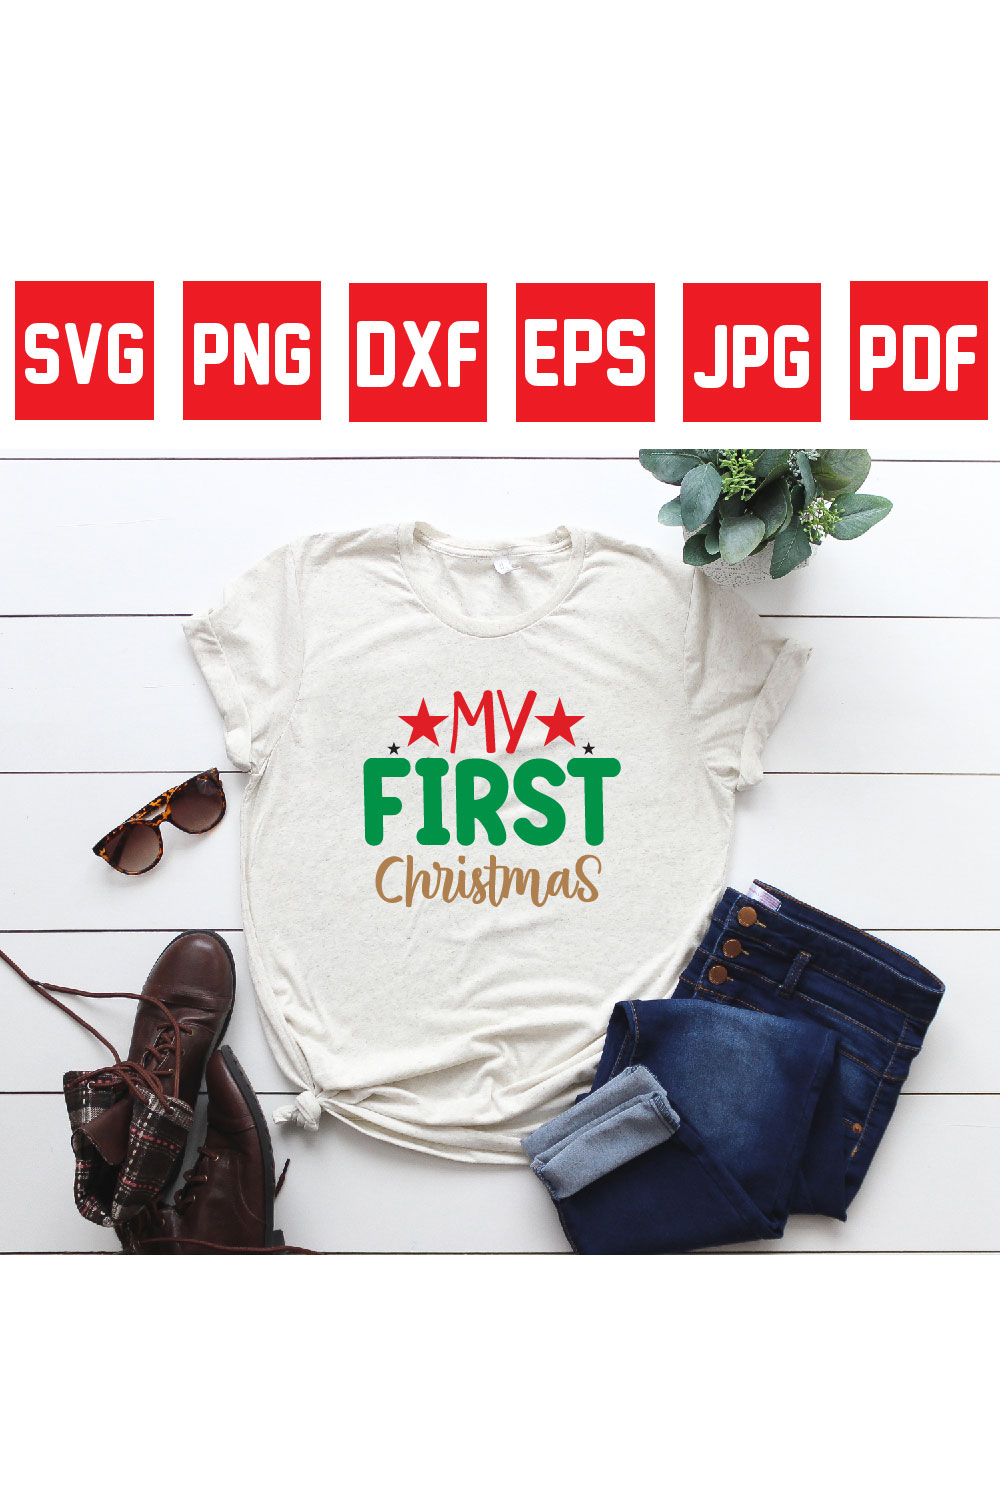 my first christmas pinterest preview image.